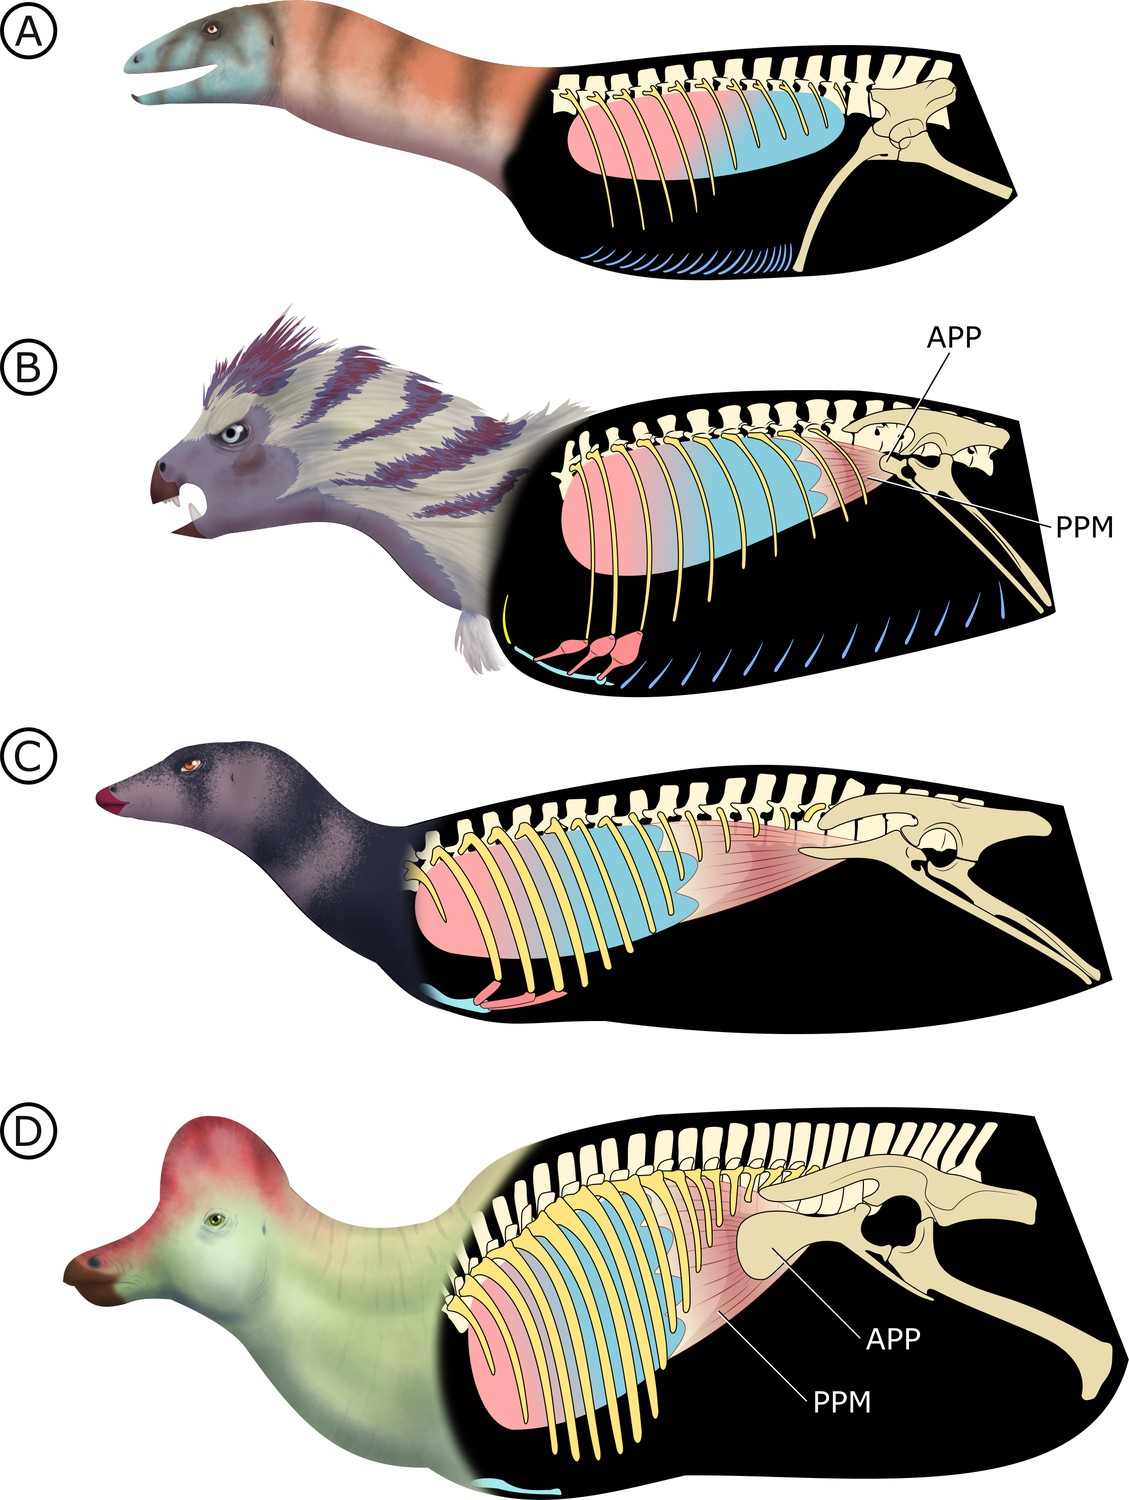 New dinosaur find part of previously unknown level of dino diversity in the  Southwest